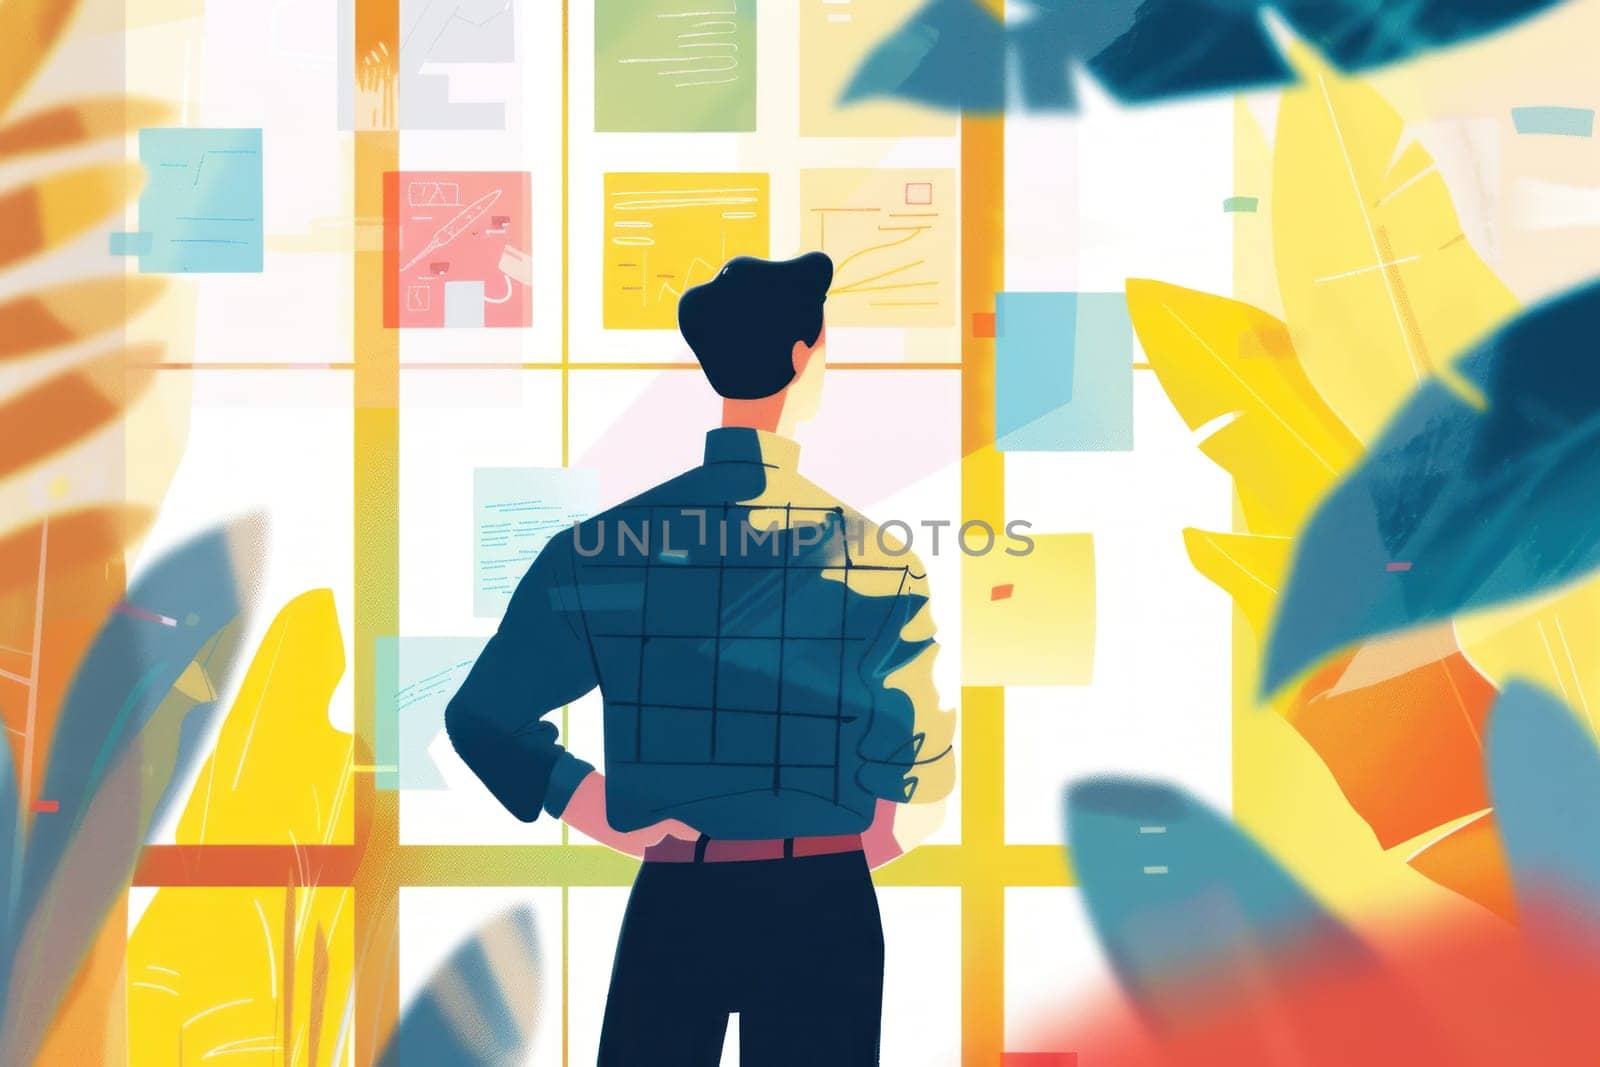 A man is looking out of a window at a wall covered in colorful sticky notes. Concept of organization and productivity, as the man is reviewing or planning his tasks